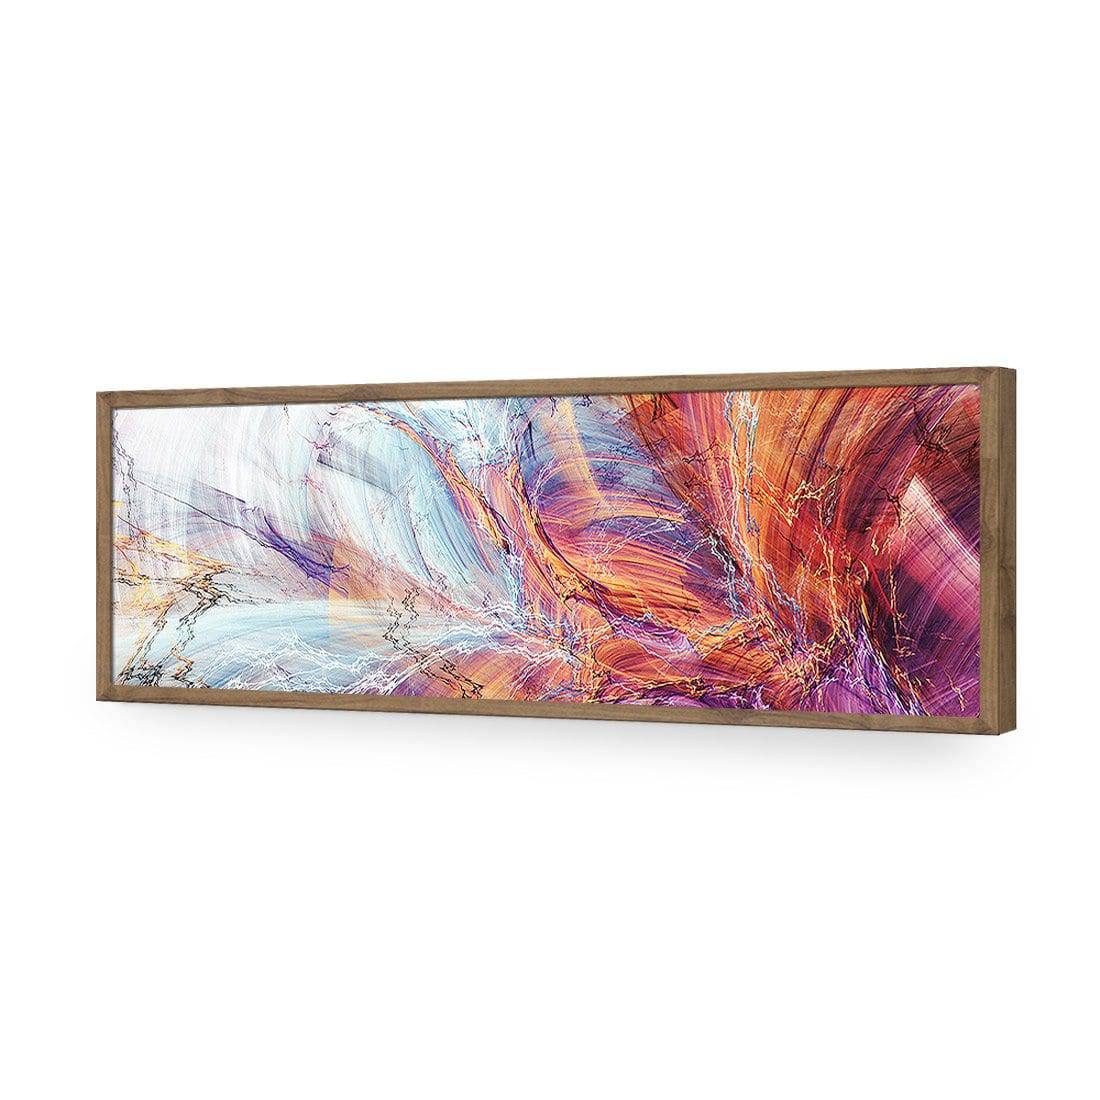 Glorious, Long-Acrylic-Wall Art Design-Without Border-Acrylic - Natural Frame-60x20cm-Wall Art Designs